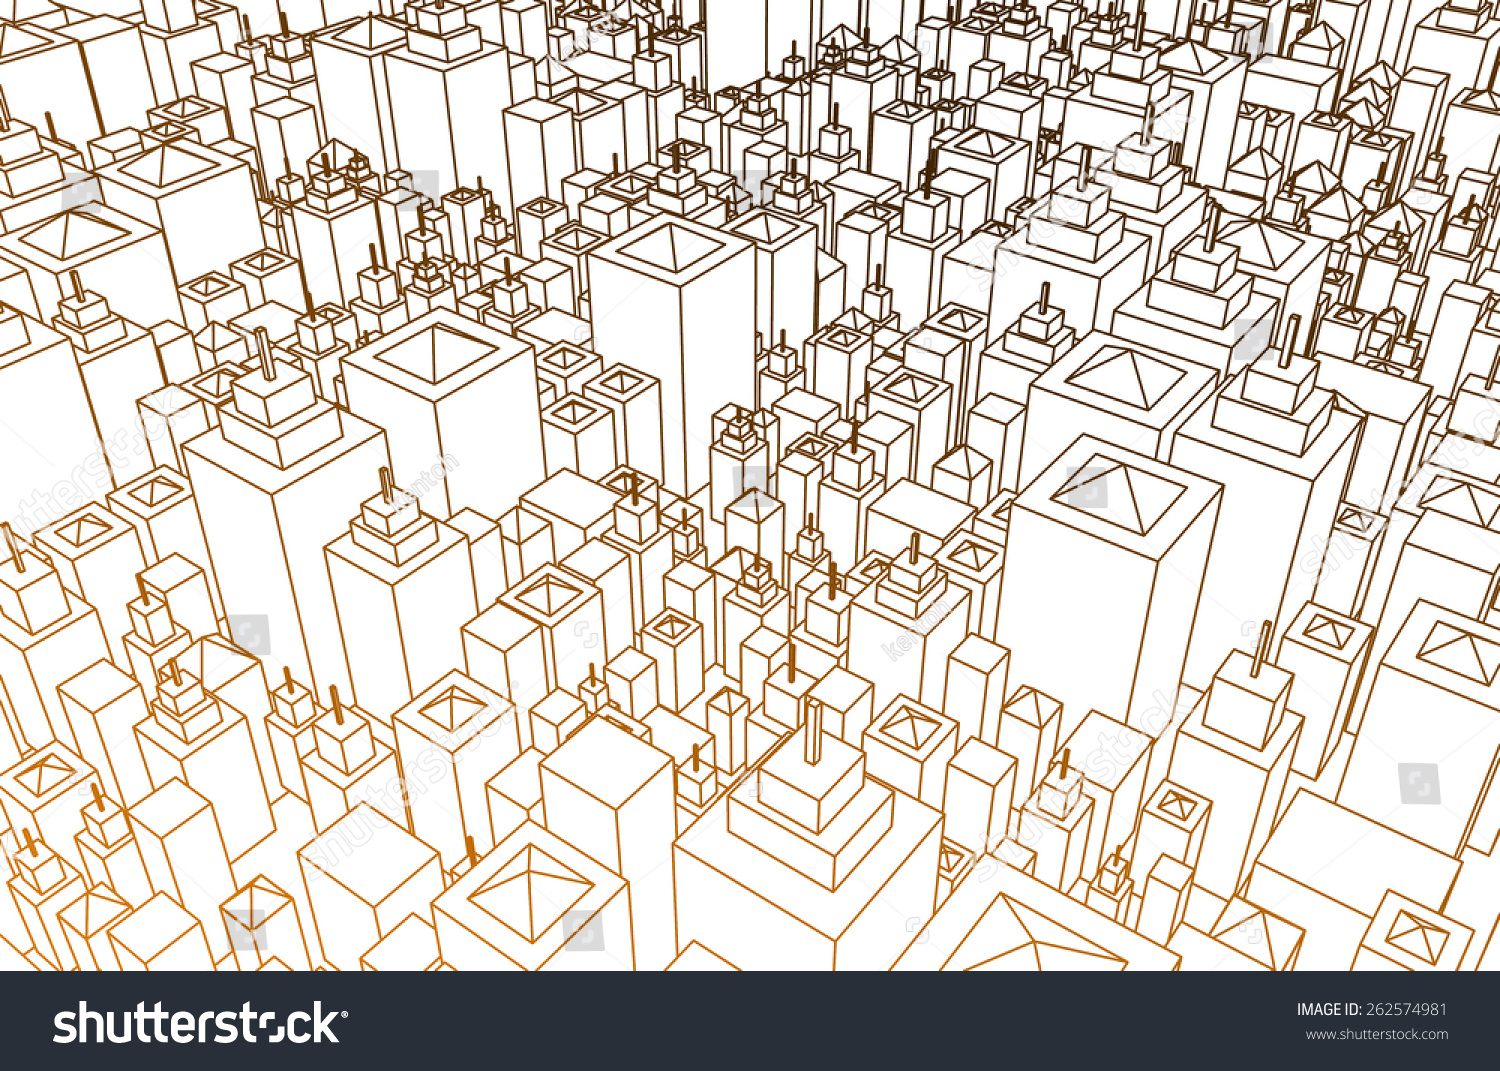 Cartoon Buildings Abstract Background With Lines Only Stock Photo